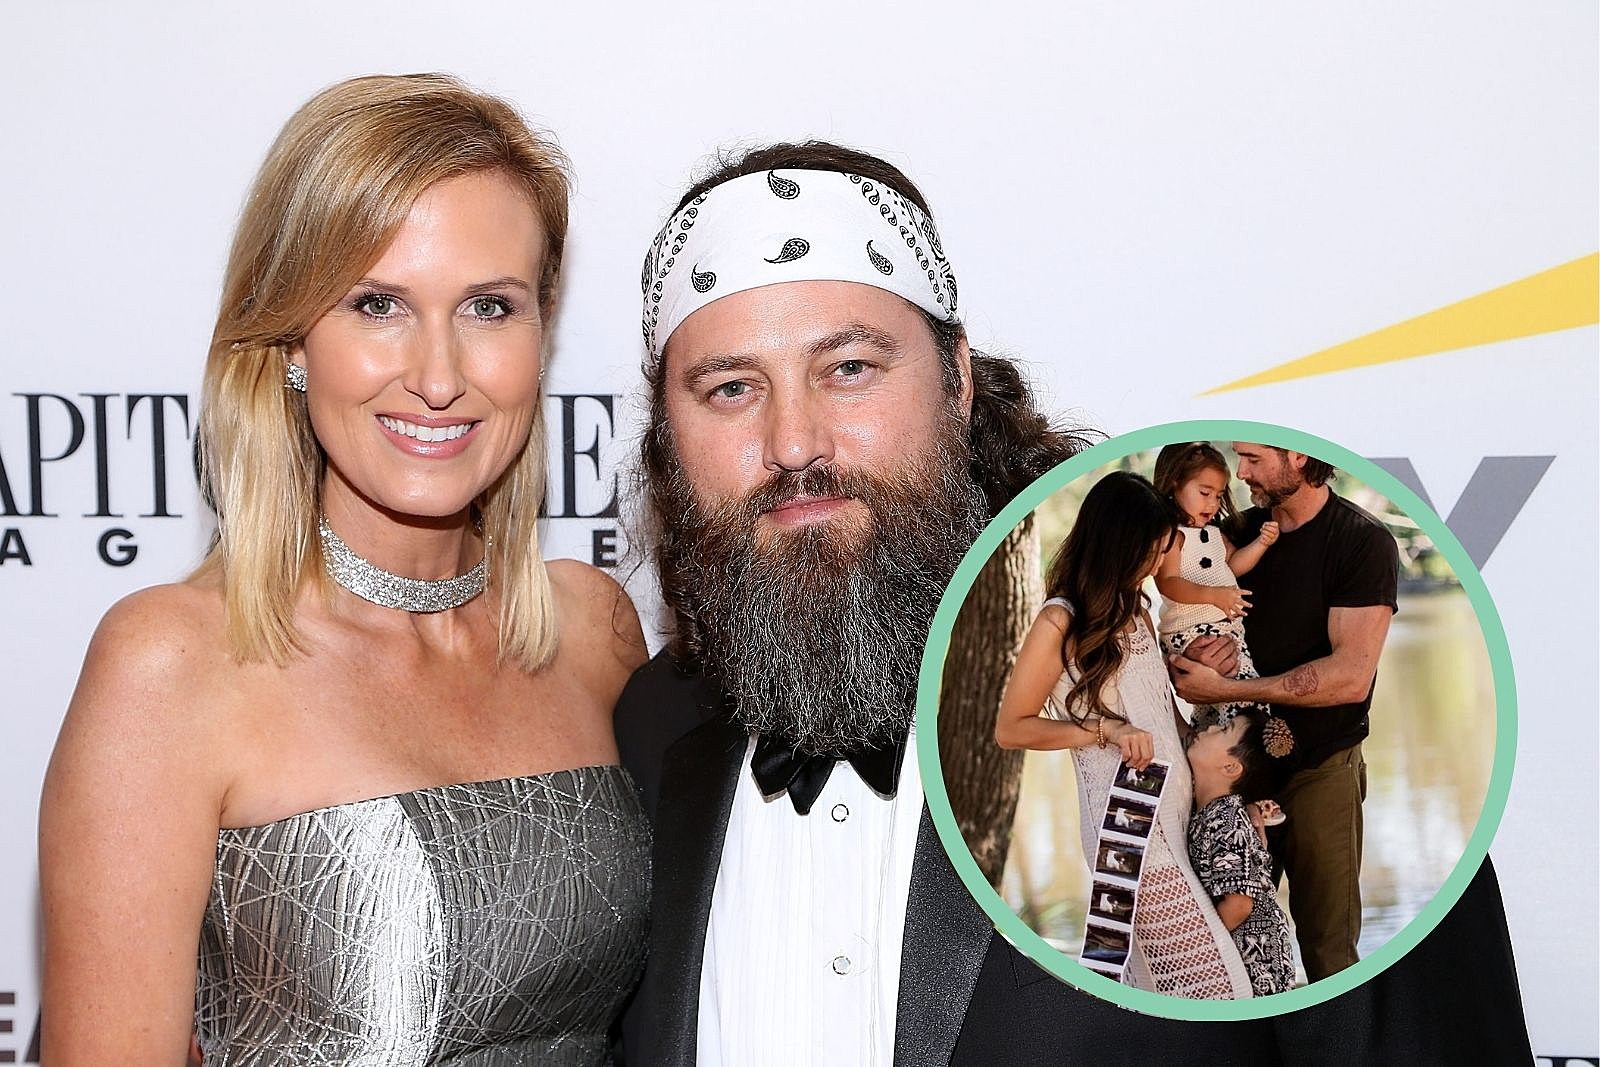 Duck Dynasty’s Willie and Korie Robertson Expecting Eighth Grandchild